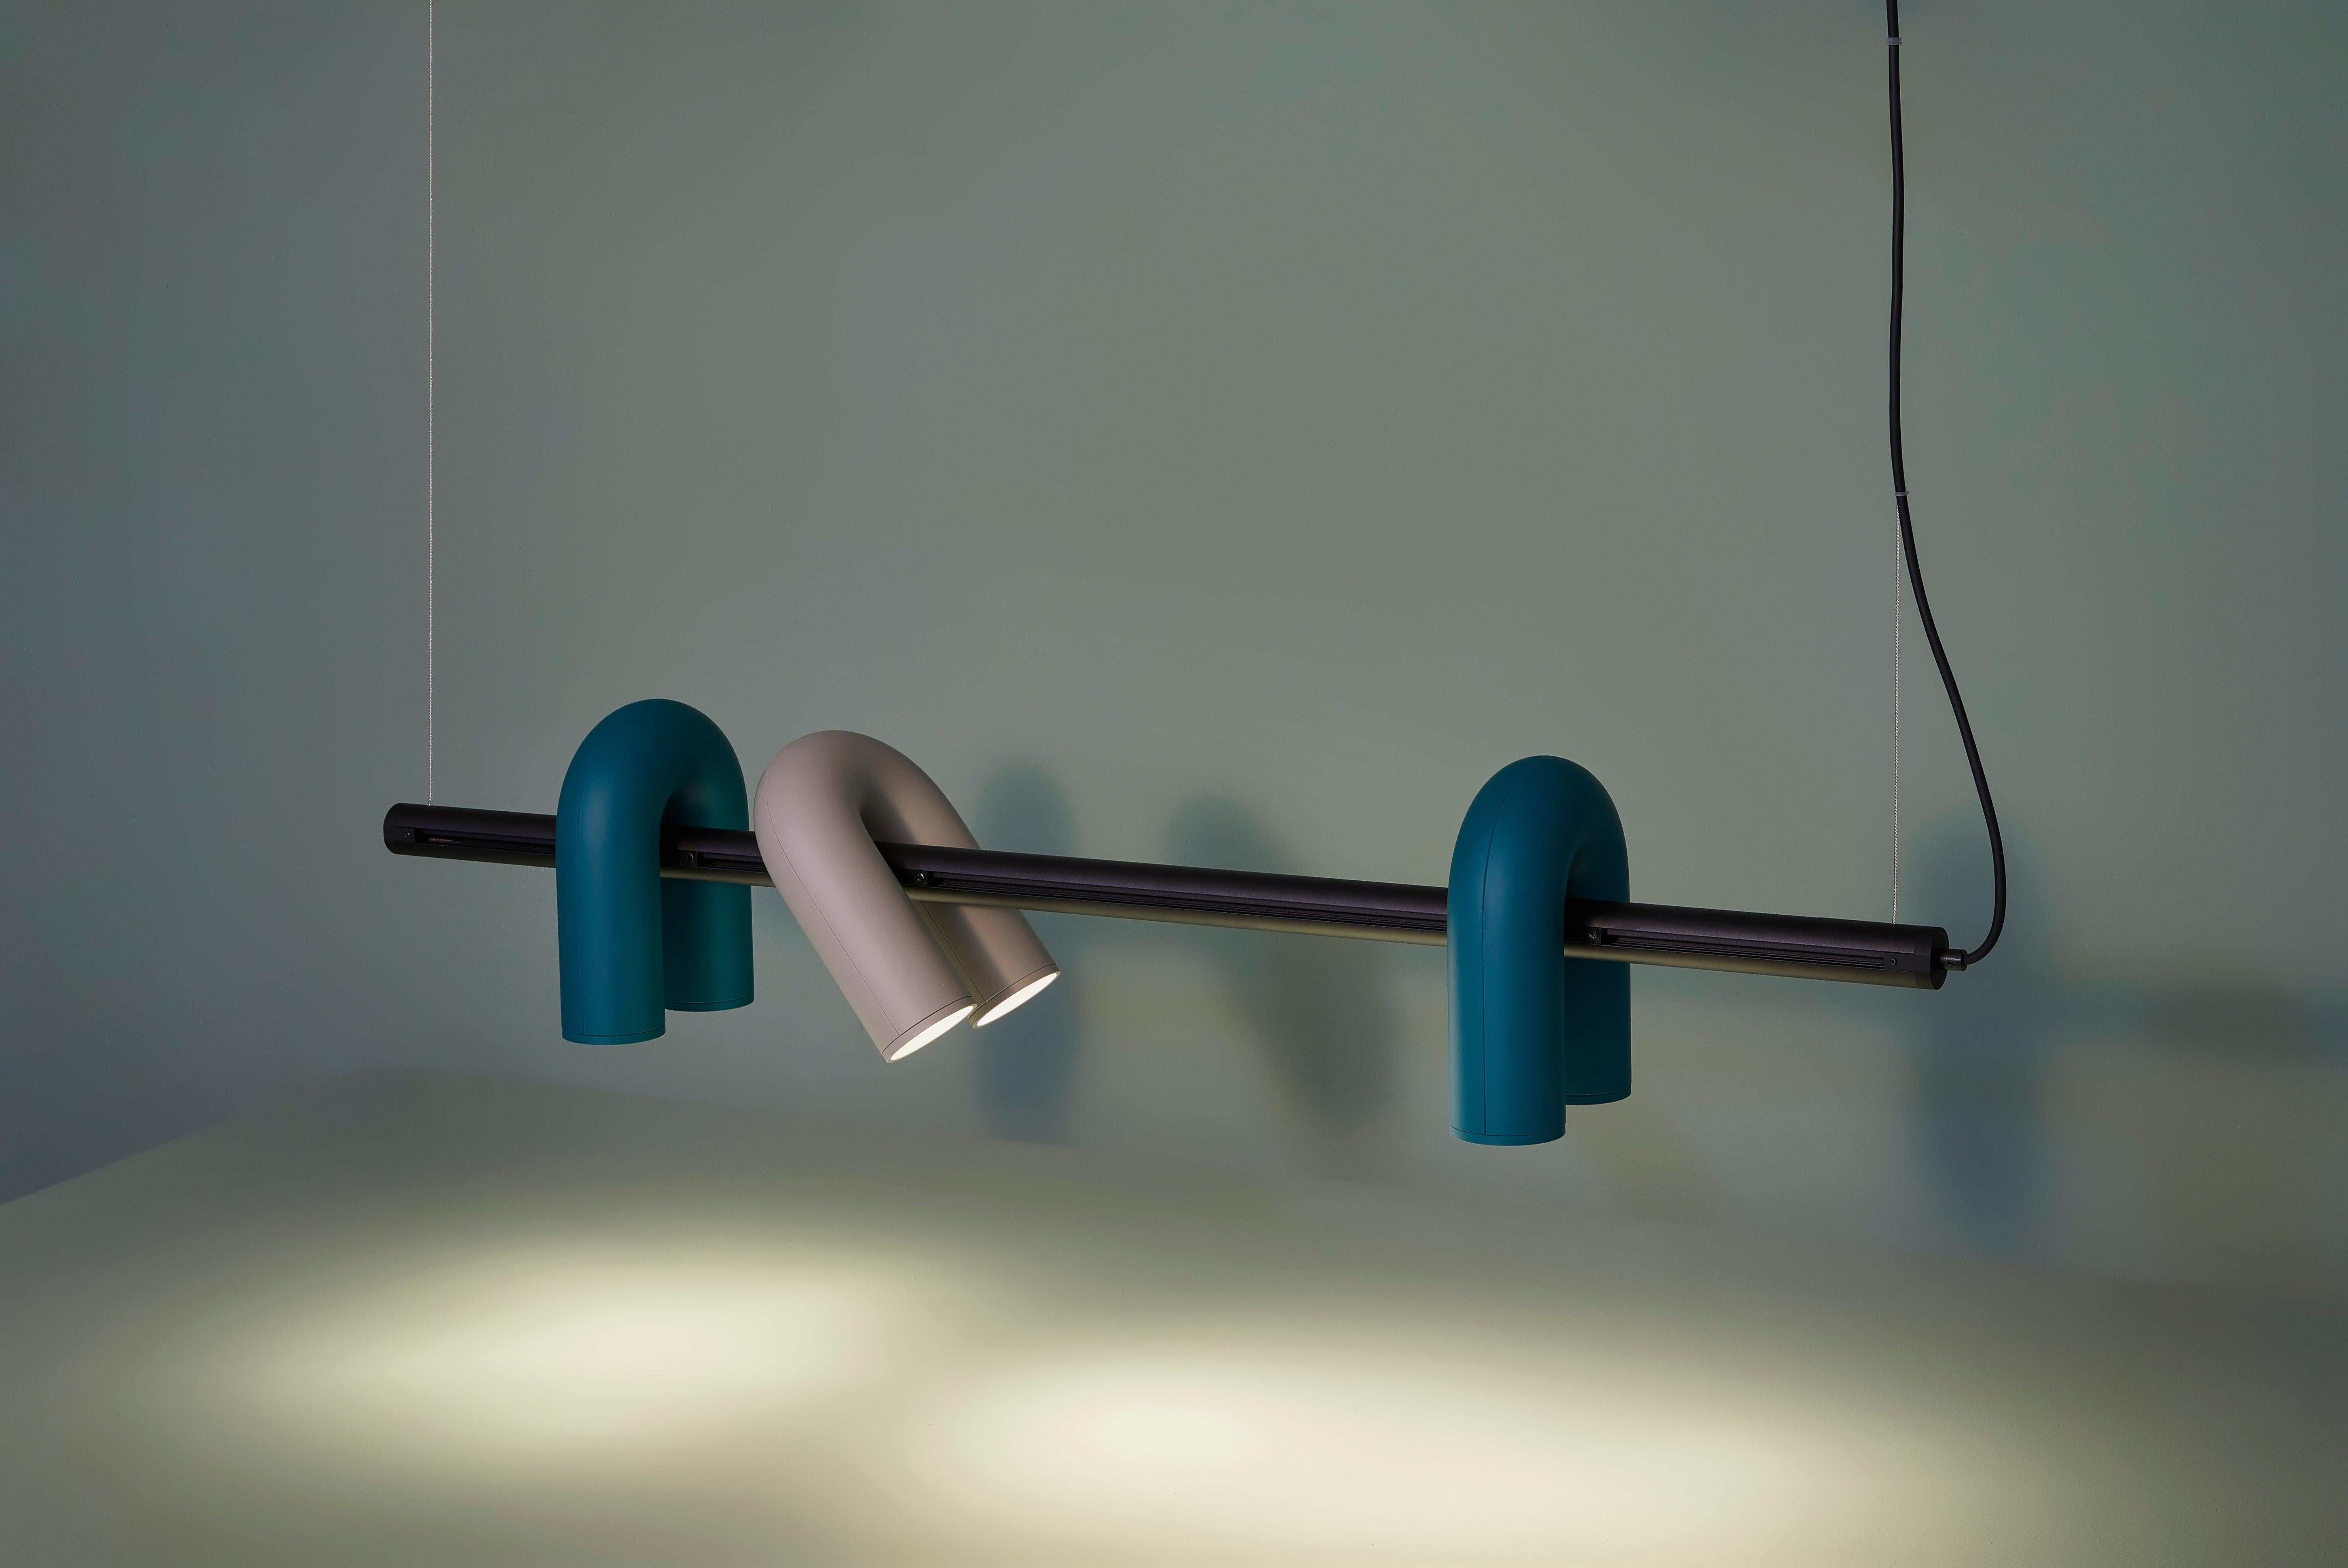 Cirkus track lights by AGO Lighting
Coated ABS, aluminum

UL Listed
LED GU10 110-240V (not included)

Four colors available: Charcoal, grey, green, terracotta
Rail lengths (3 sizes available): 60 x 3 cm / 90 x 3 cm / 120 x 3 cm
Spot size: 18 x 14,8